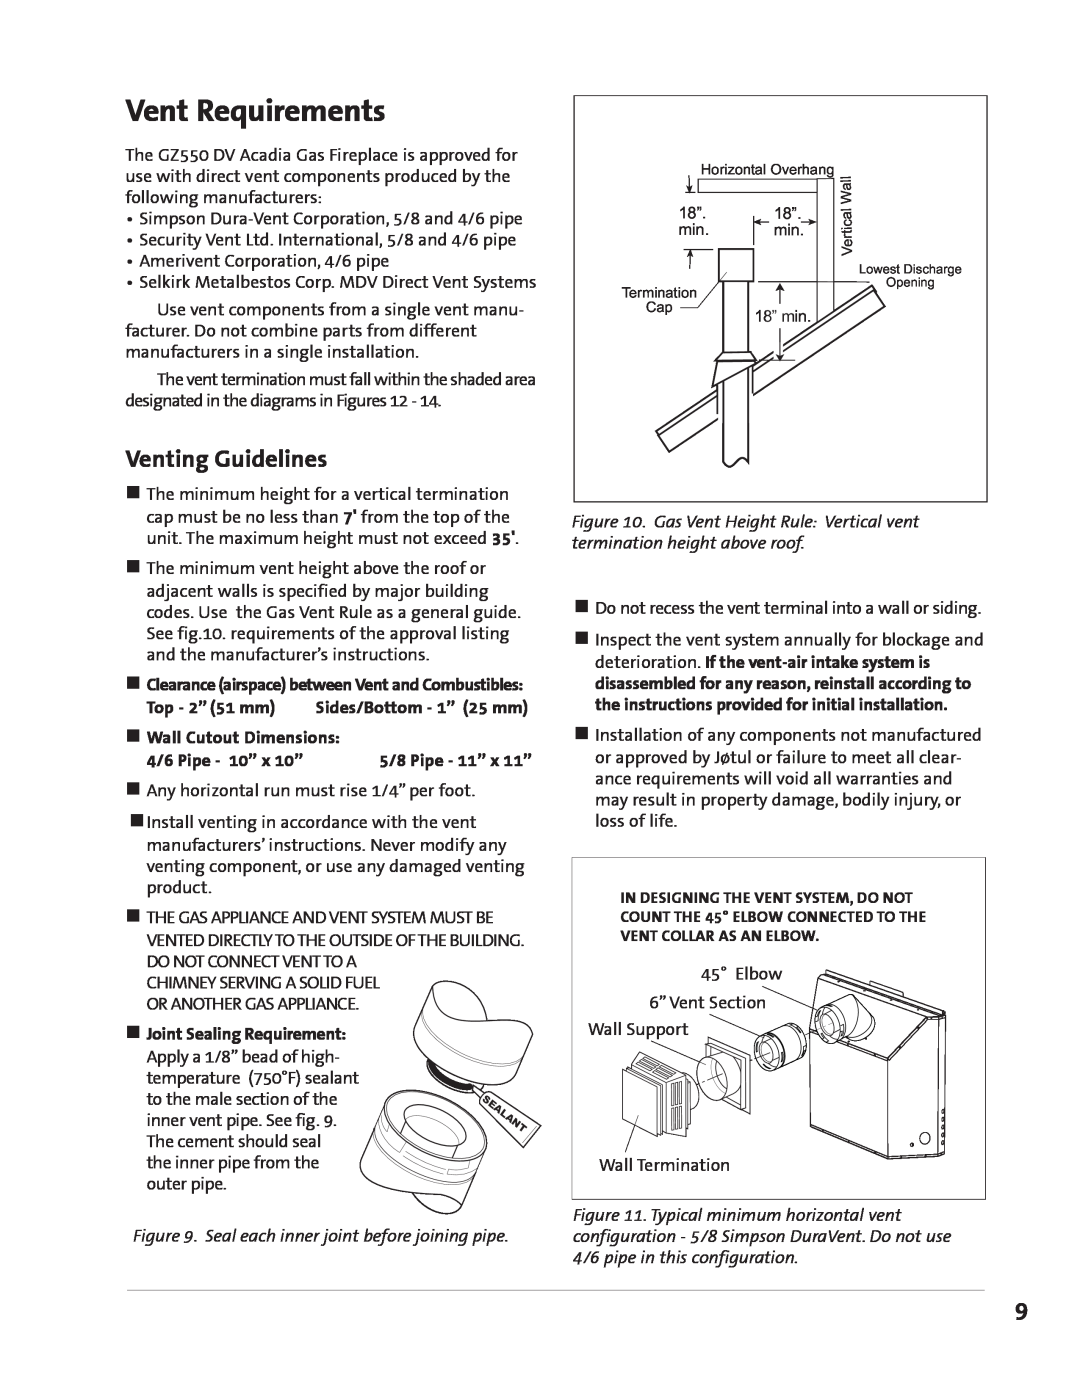 Jotul GZ 550 DV II manual Vent Requirements, Venting Guidelines 